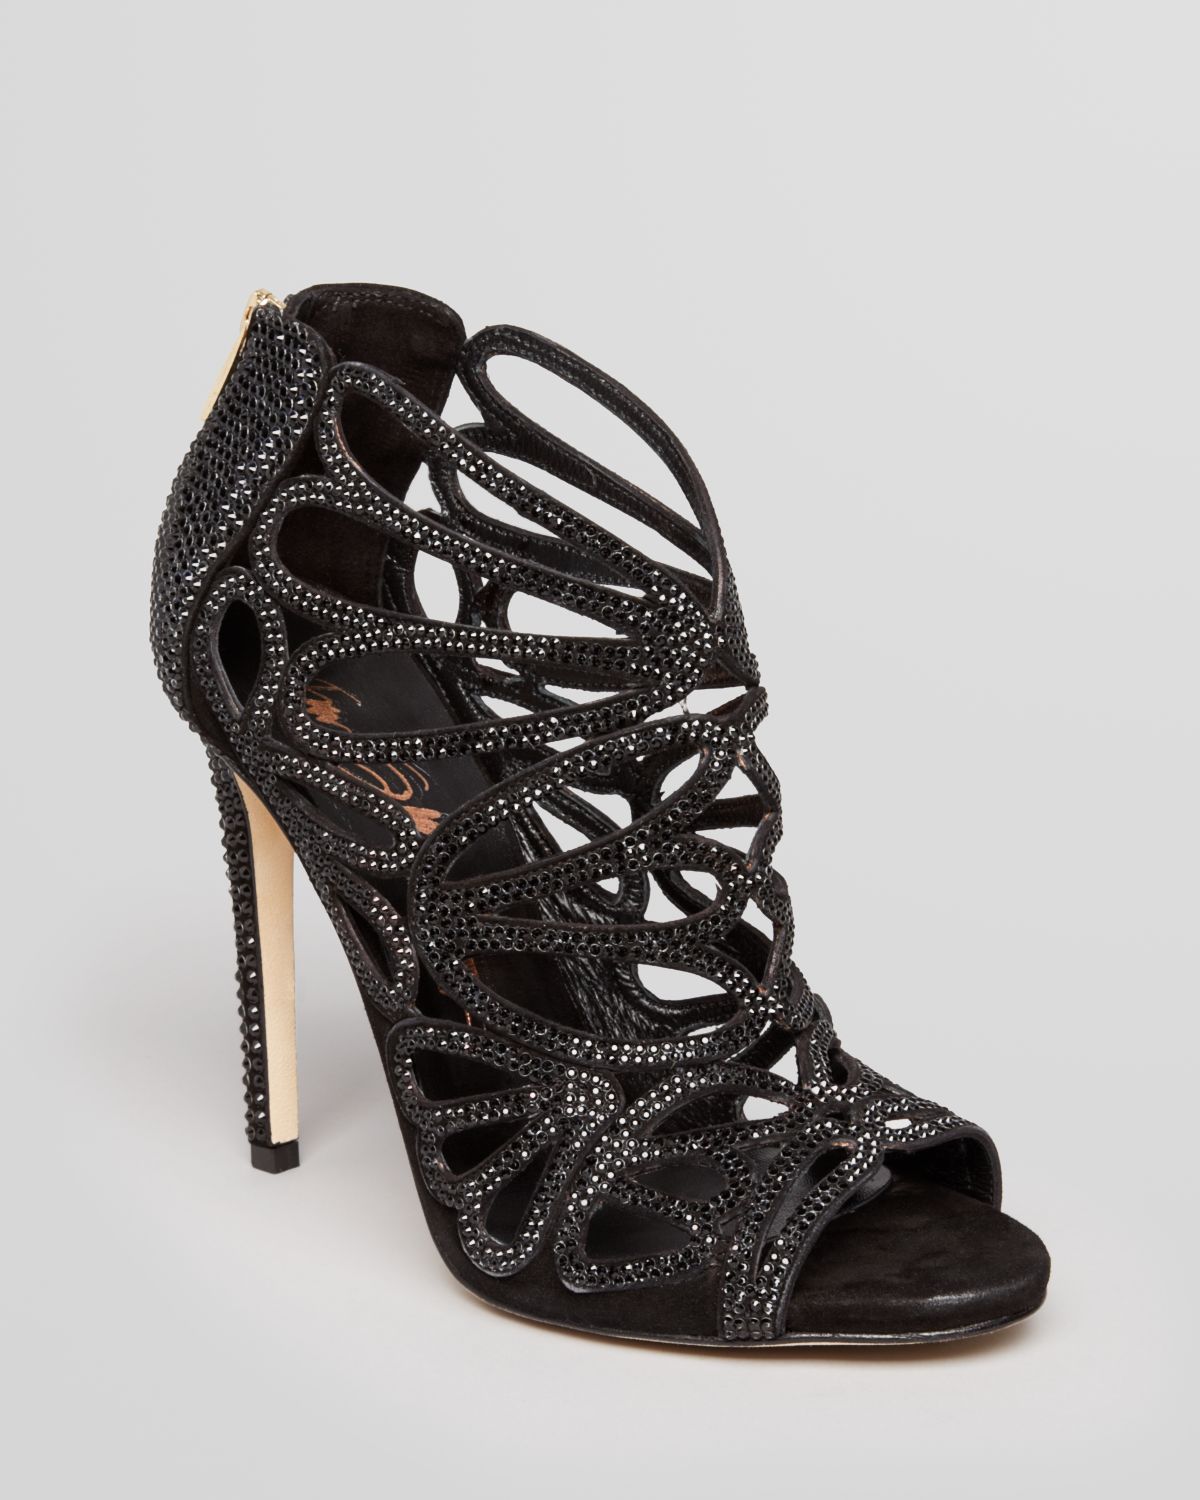 Le Silla Open Toe Evening Sandals Caged High Heel in Black - Lyst